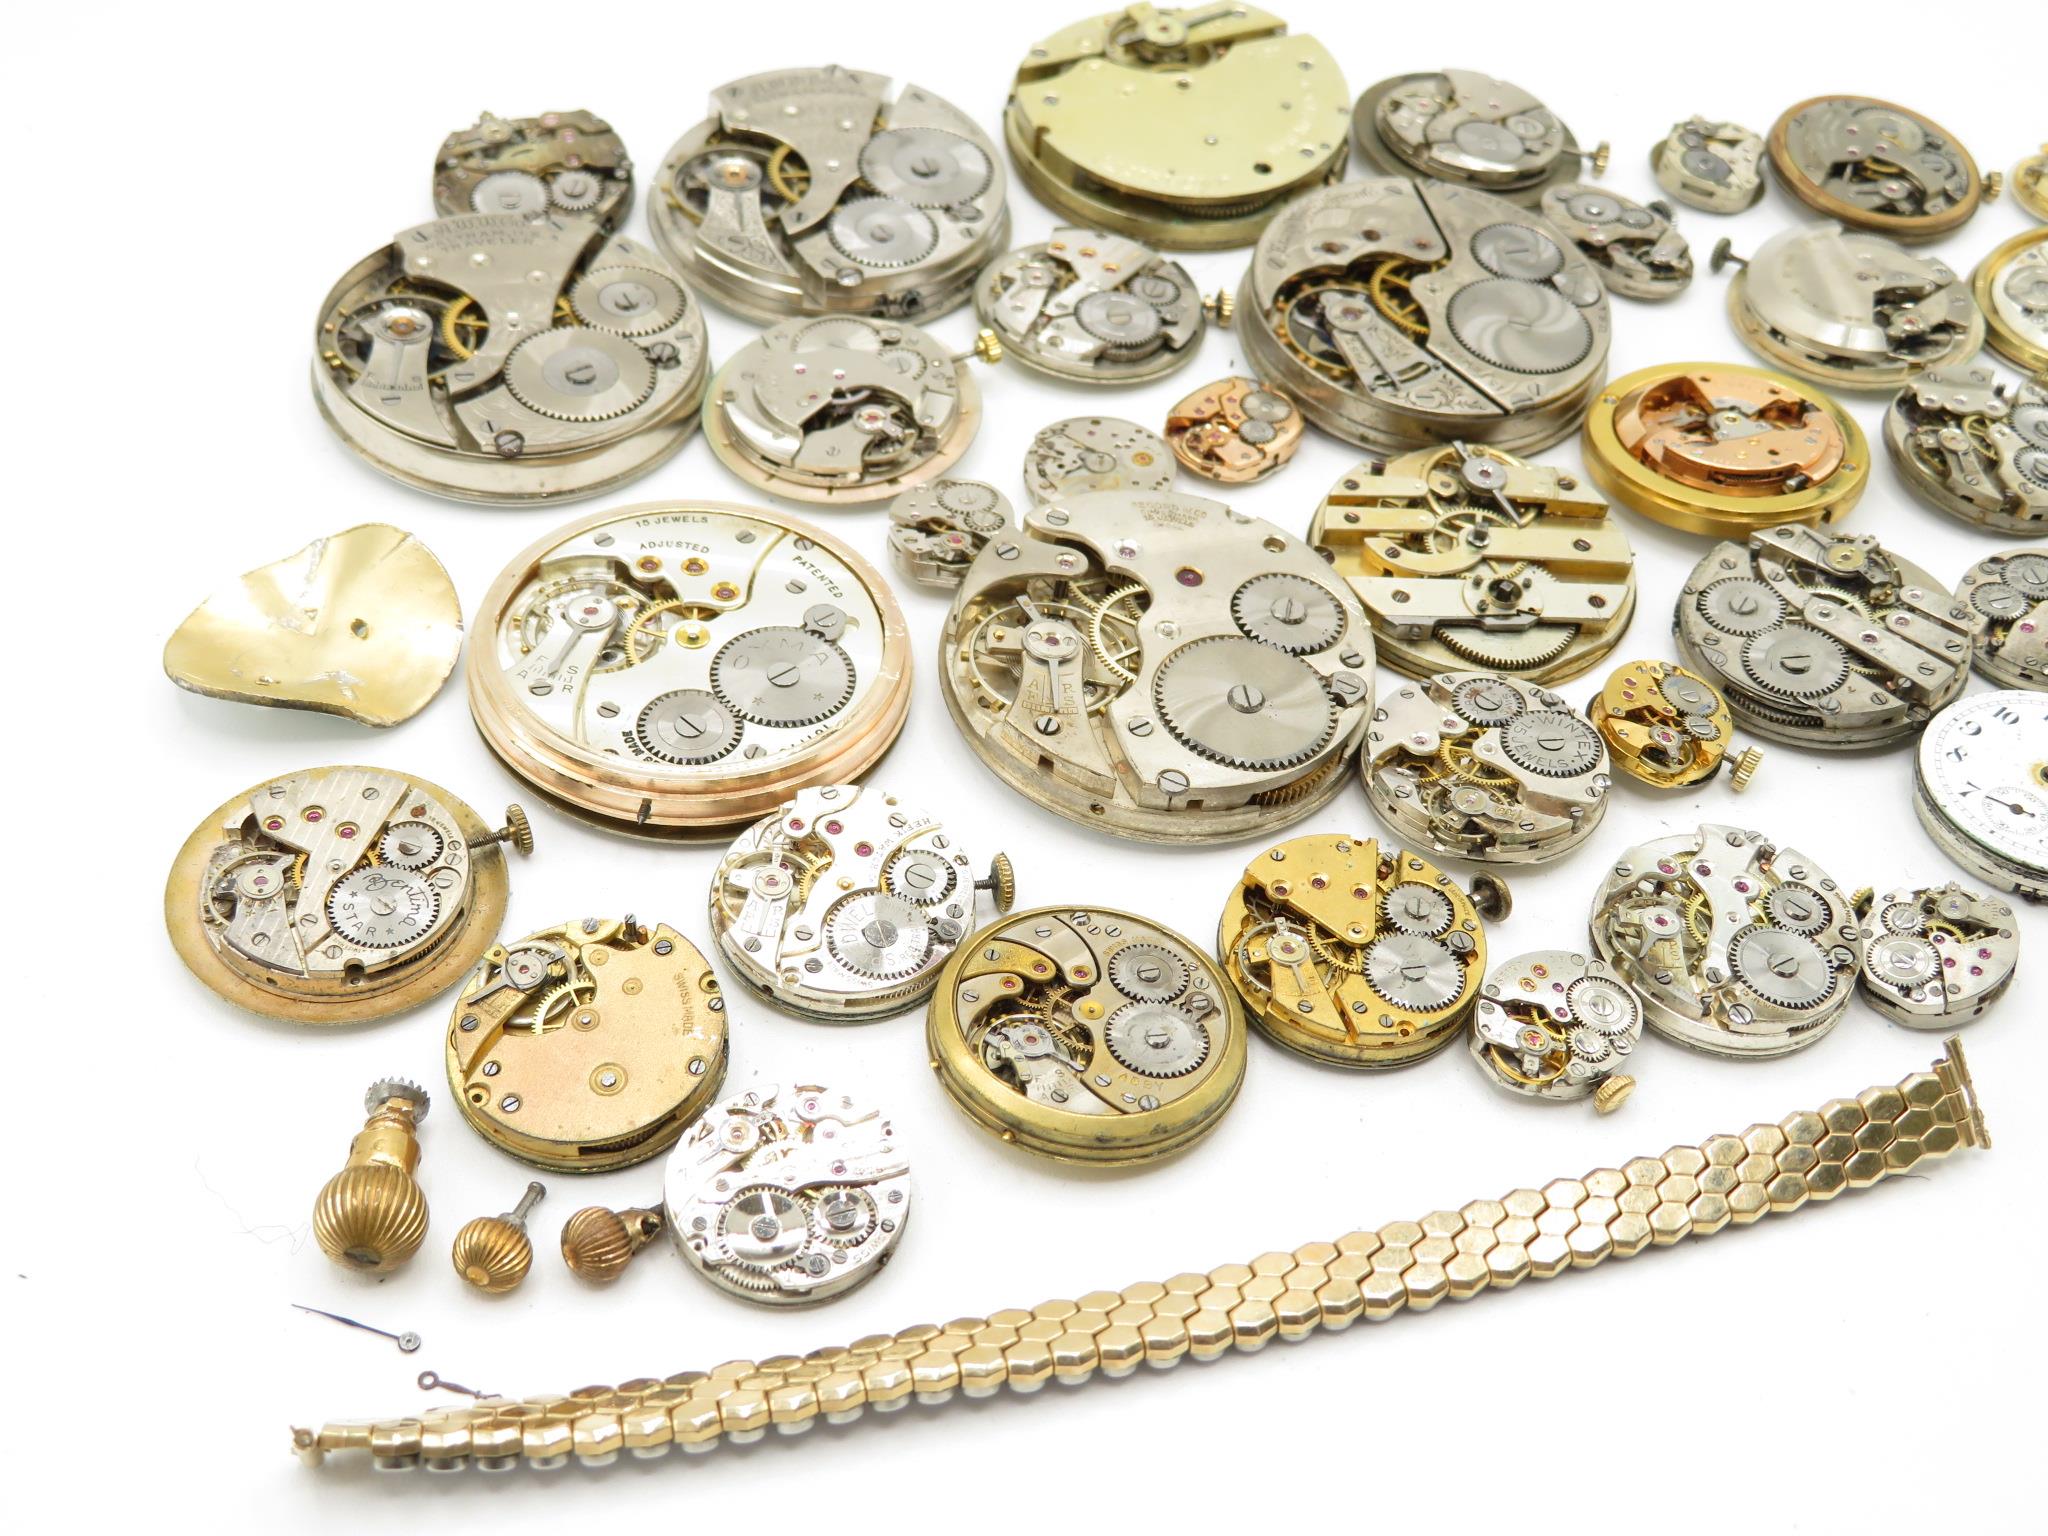 Bag of pocket watch and wristwatch movements 632g - Image 10 of 11